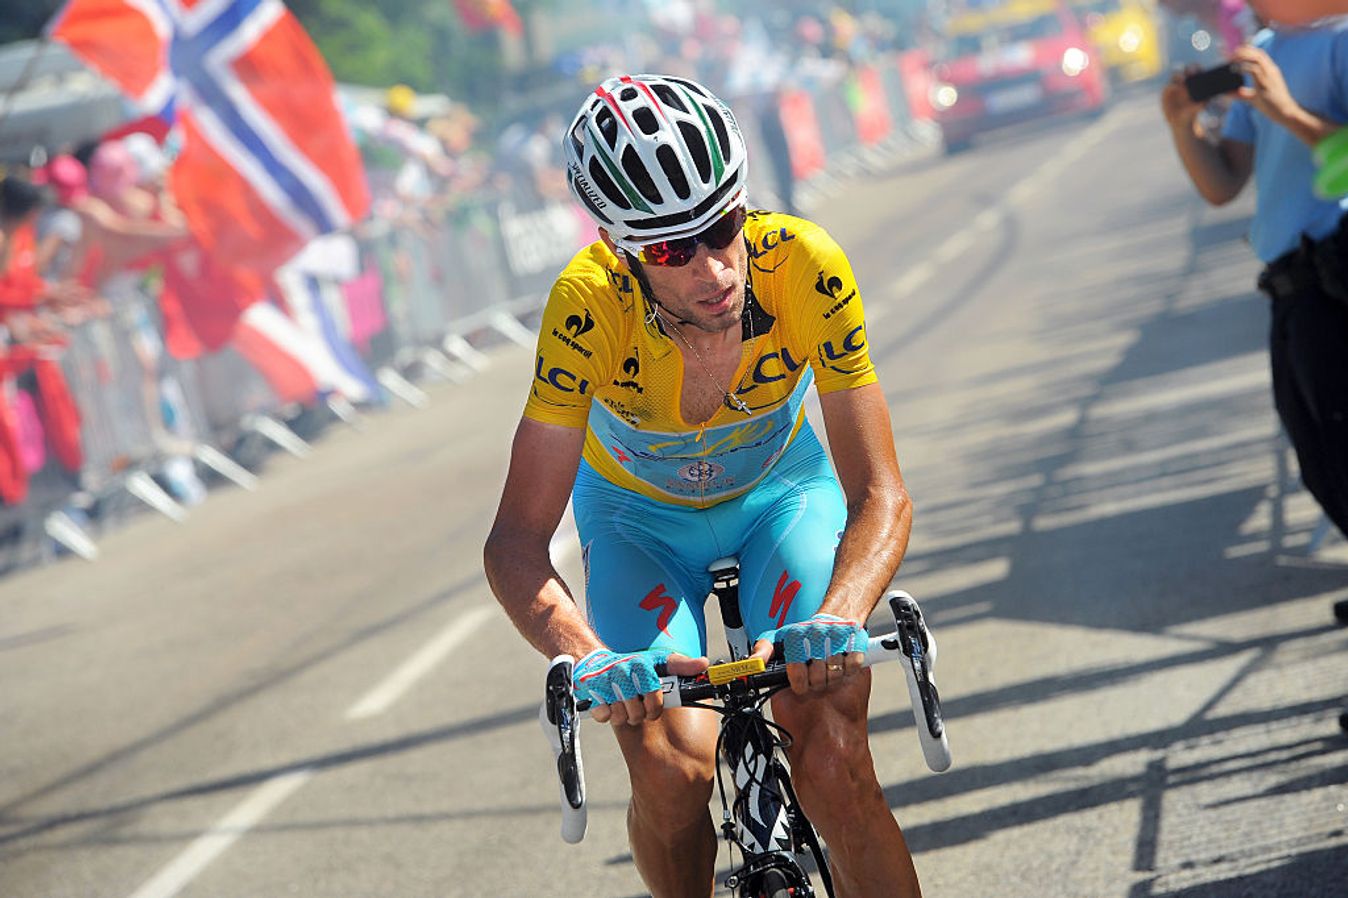 Vincenzo had double the race days of Roglič's plans when he won the Tour in 2014